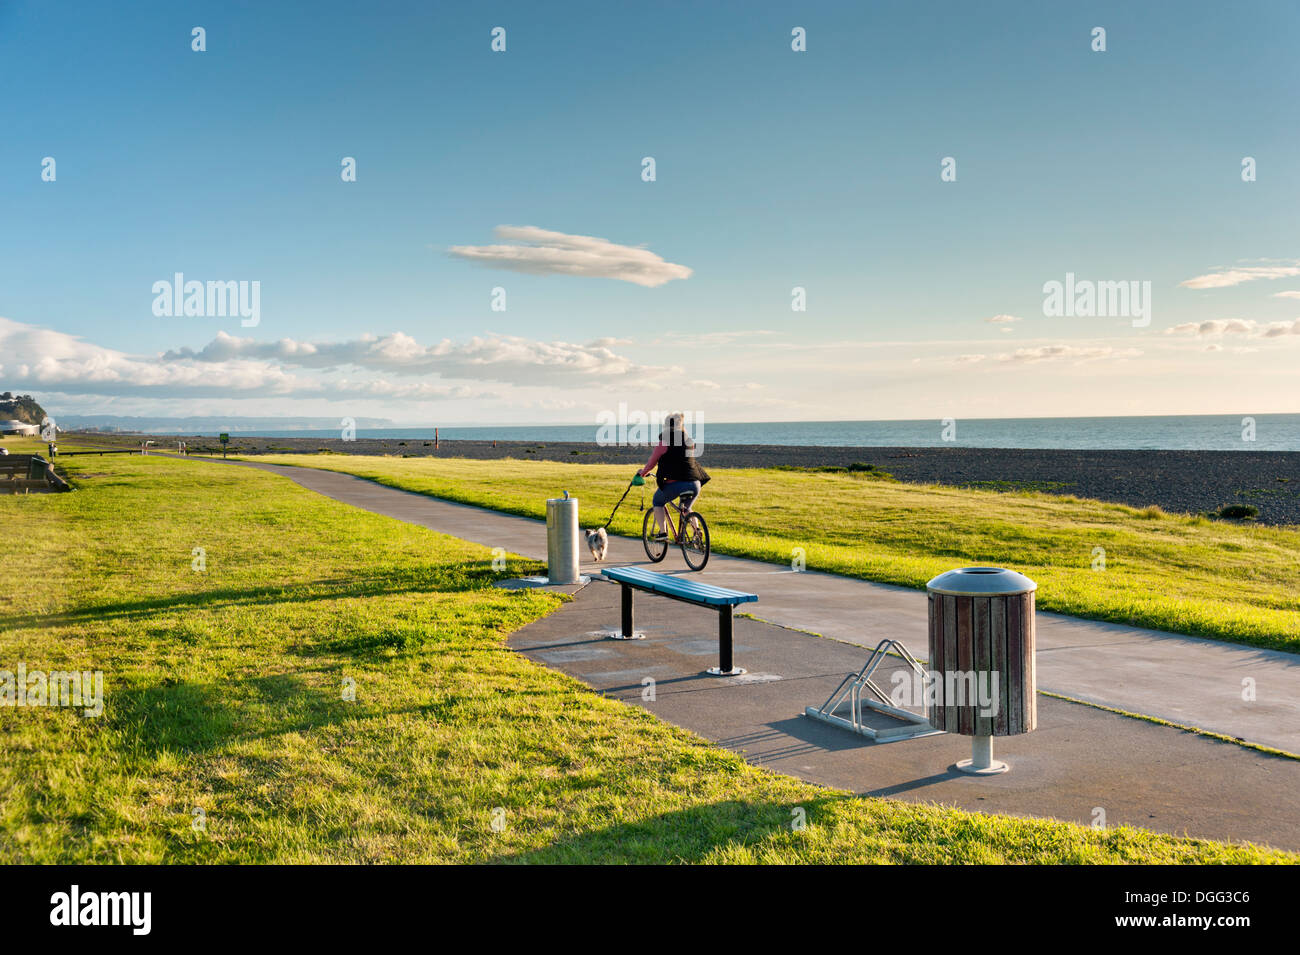 Napier, North Island, New Zealand. Early morning dog walking on a bicycle on the seafront. Stock Photo